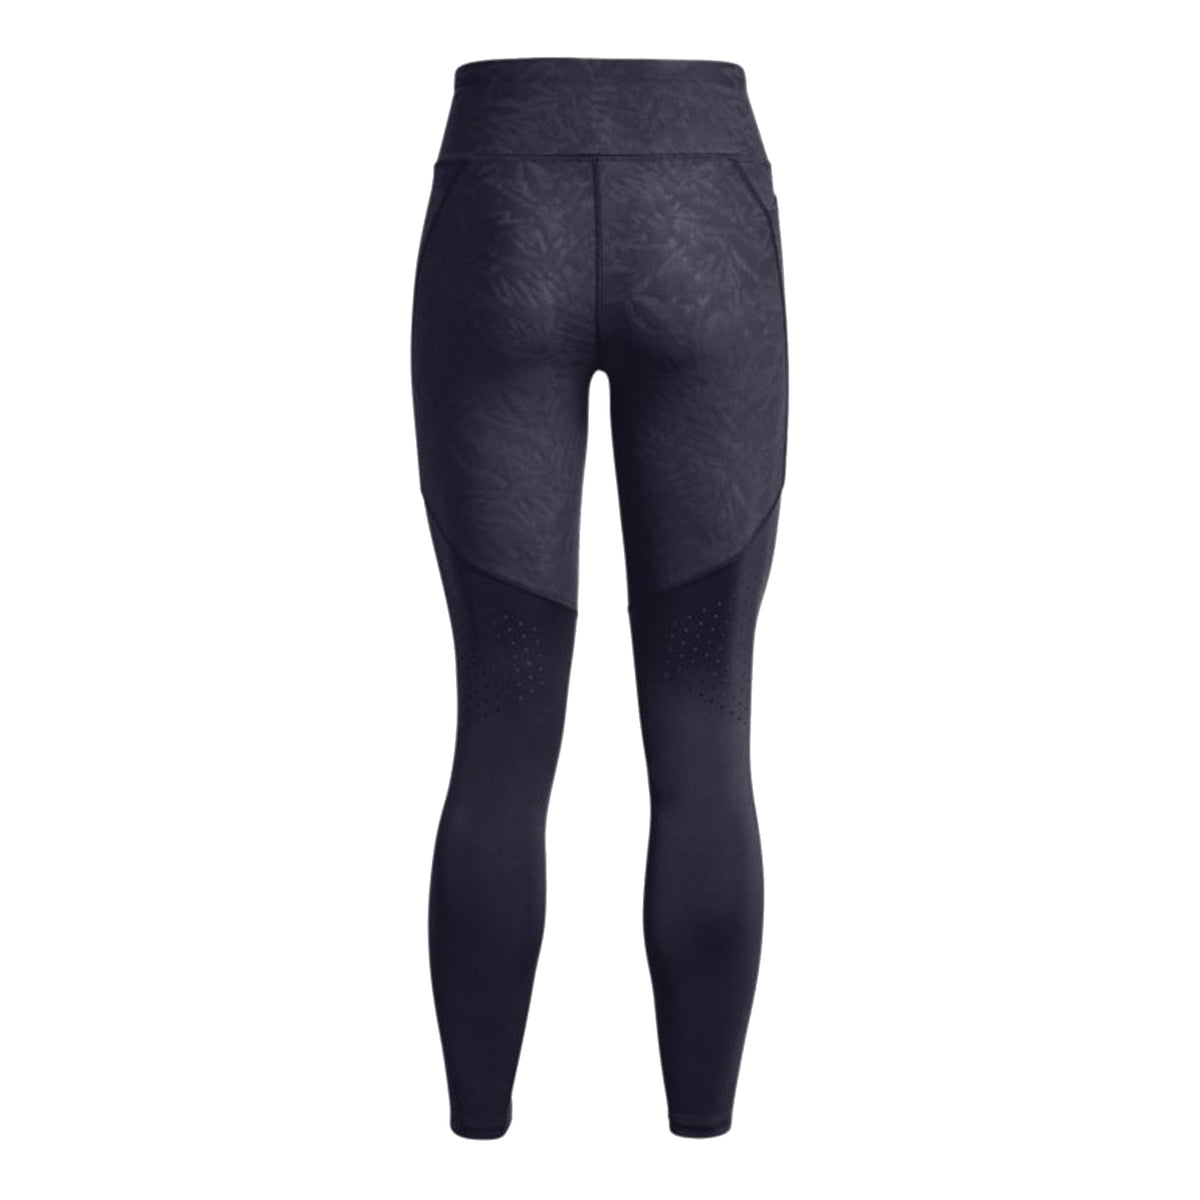 Under Armour Womens Fly Fast 3.0 Tights: Tempered Steel